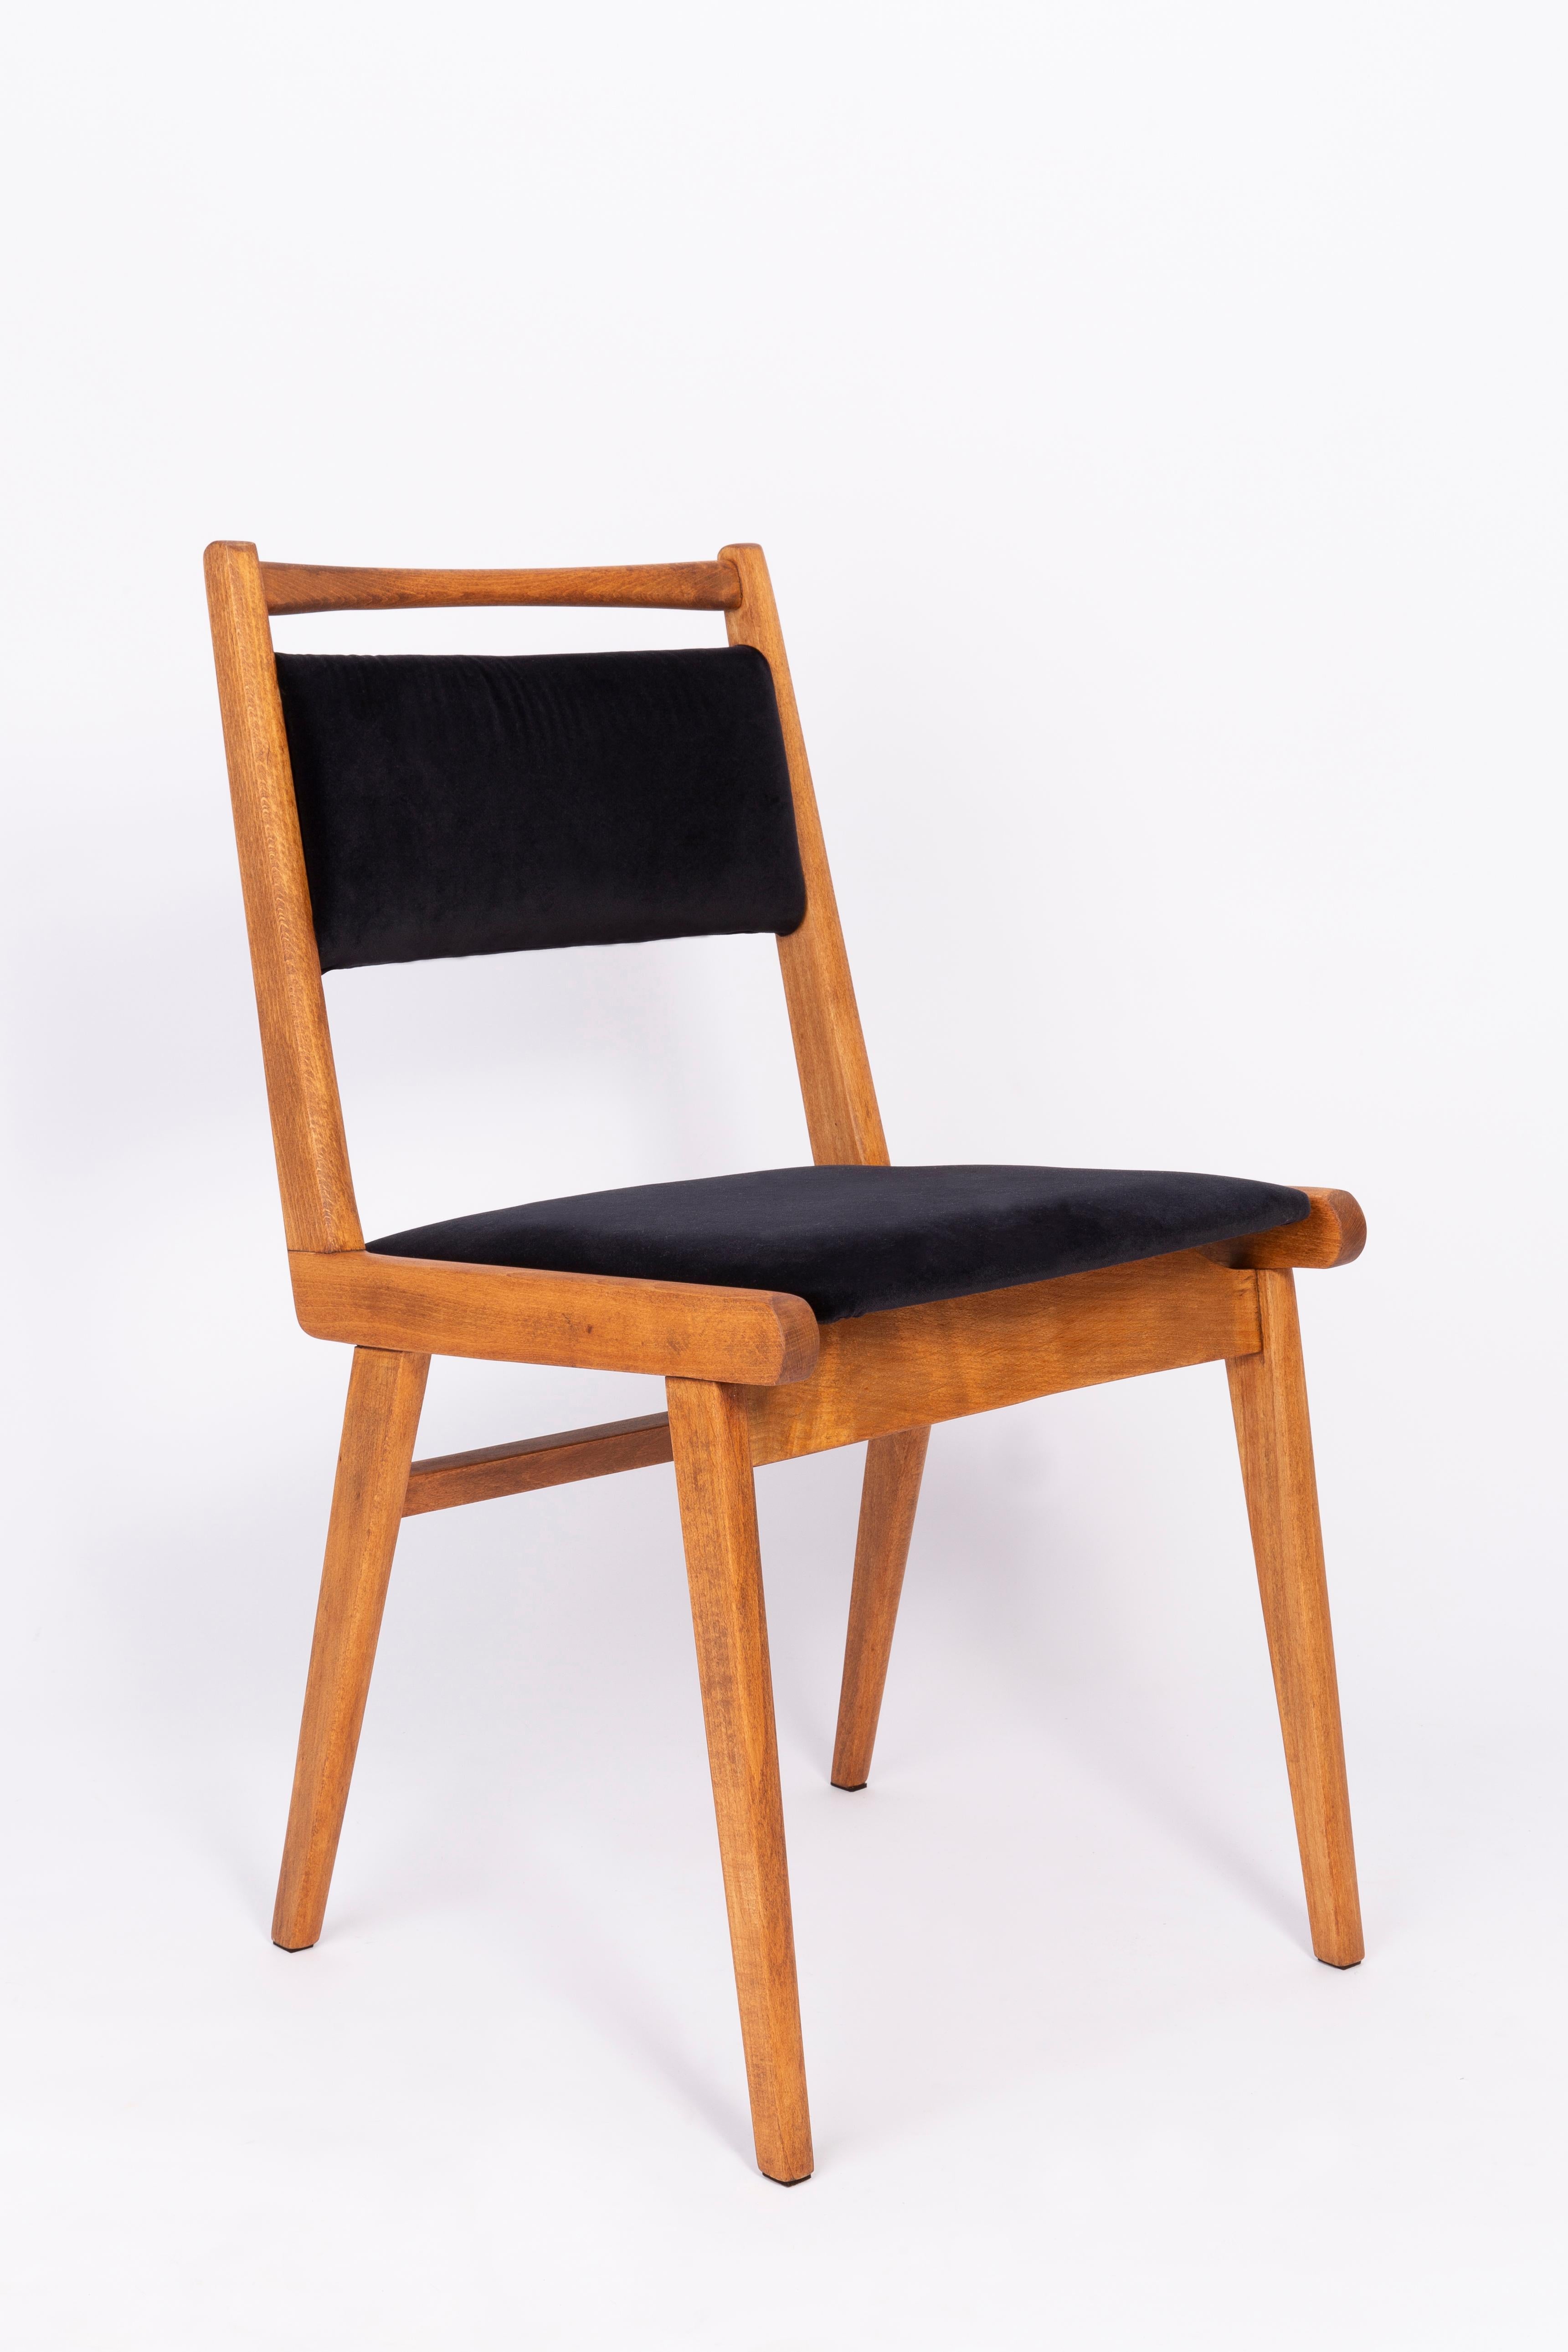 Chair designed by Prof. Rajmund Halas. It is JAR type model. Made of beechwood. Chair is after a complete upholstery renovation, the woodwork has been refreshed. Seat and back is dressed in a black, durable and pleasant to the touch velvet fabric.